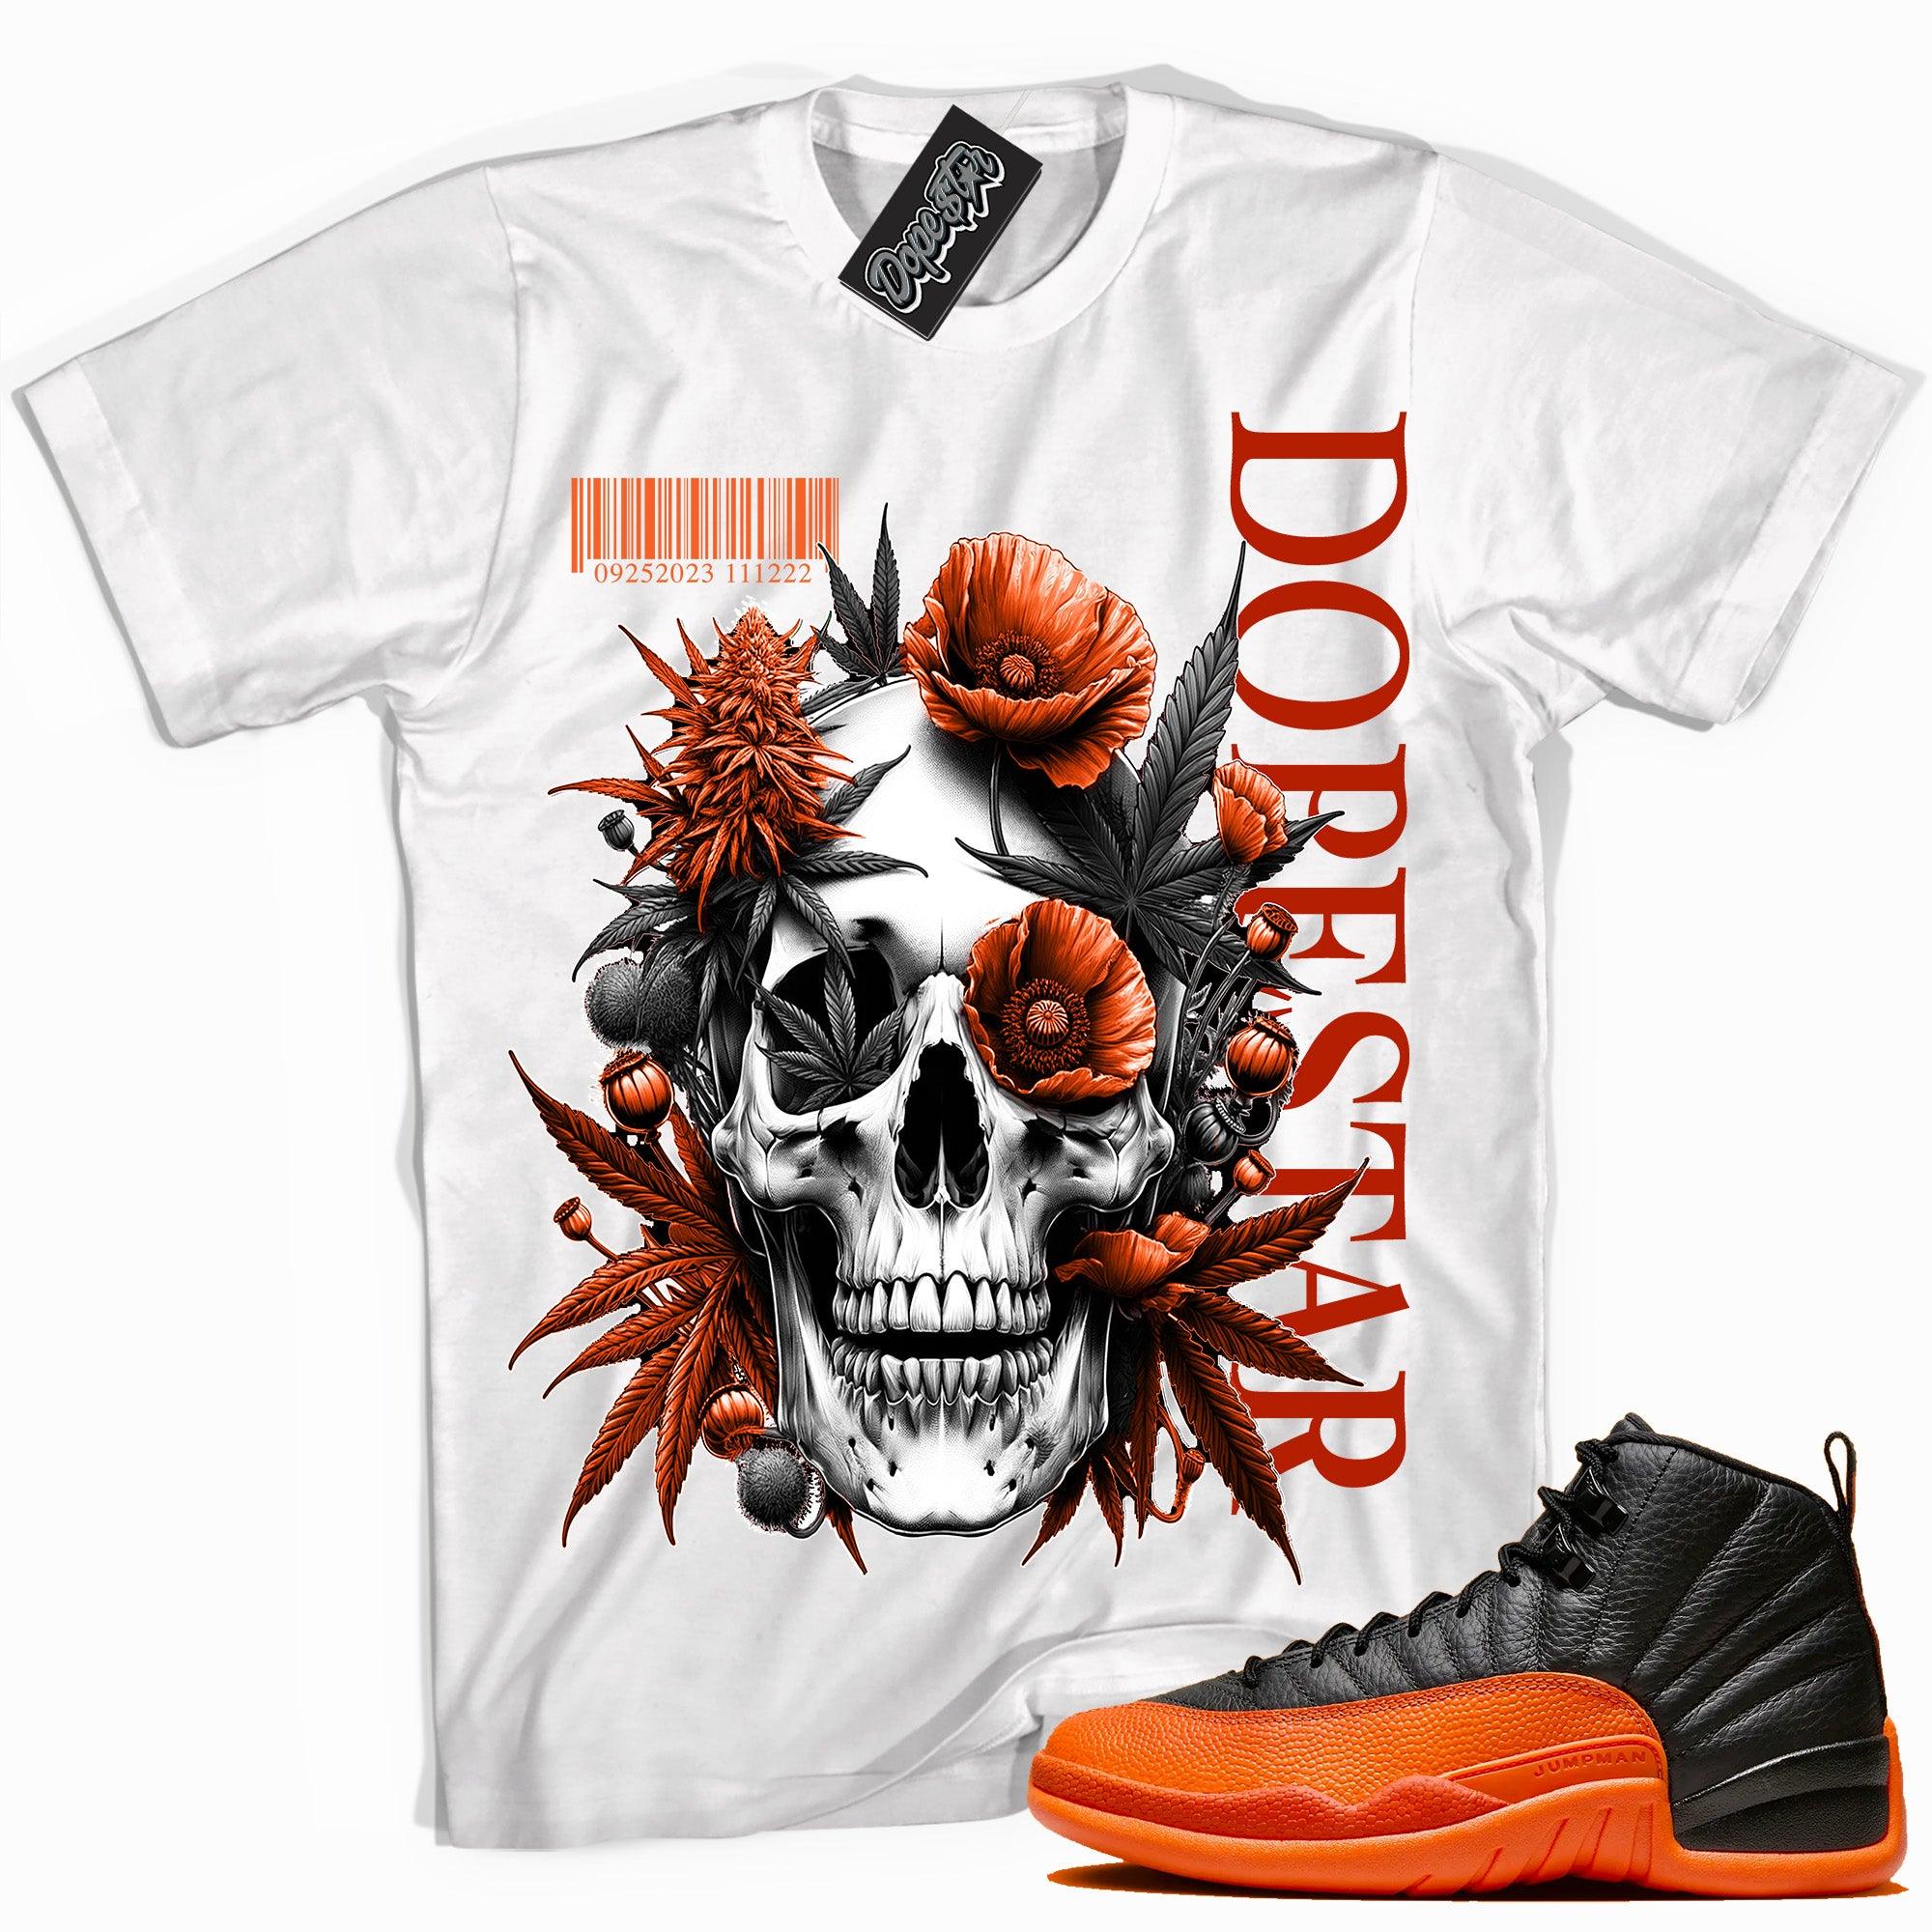 Cool White graphic tee with “ Skull Cannabis Poppies ” print, that perfectly matches Air Jordan 12 Retro WNBA All-Star Brilliant Orange sneakers 